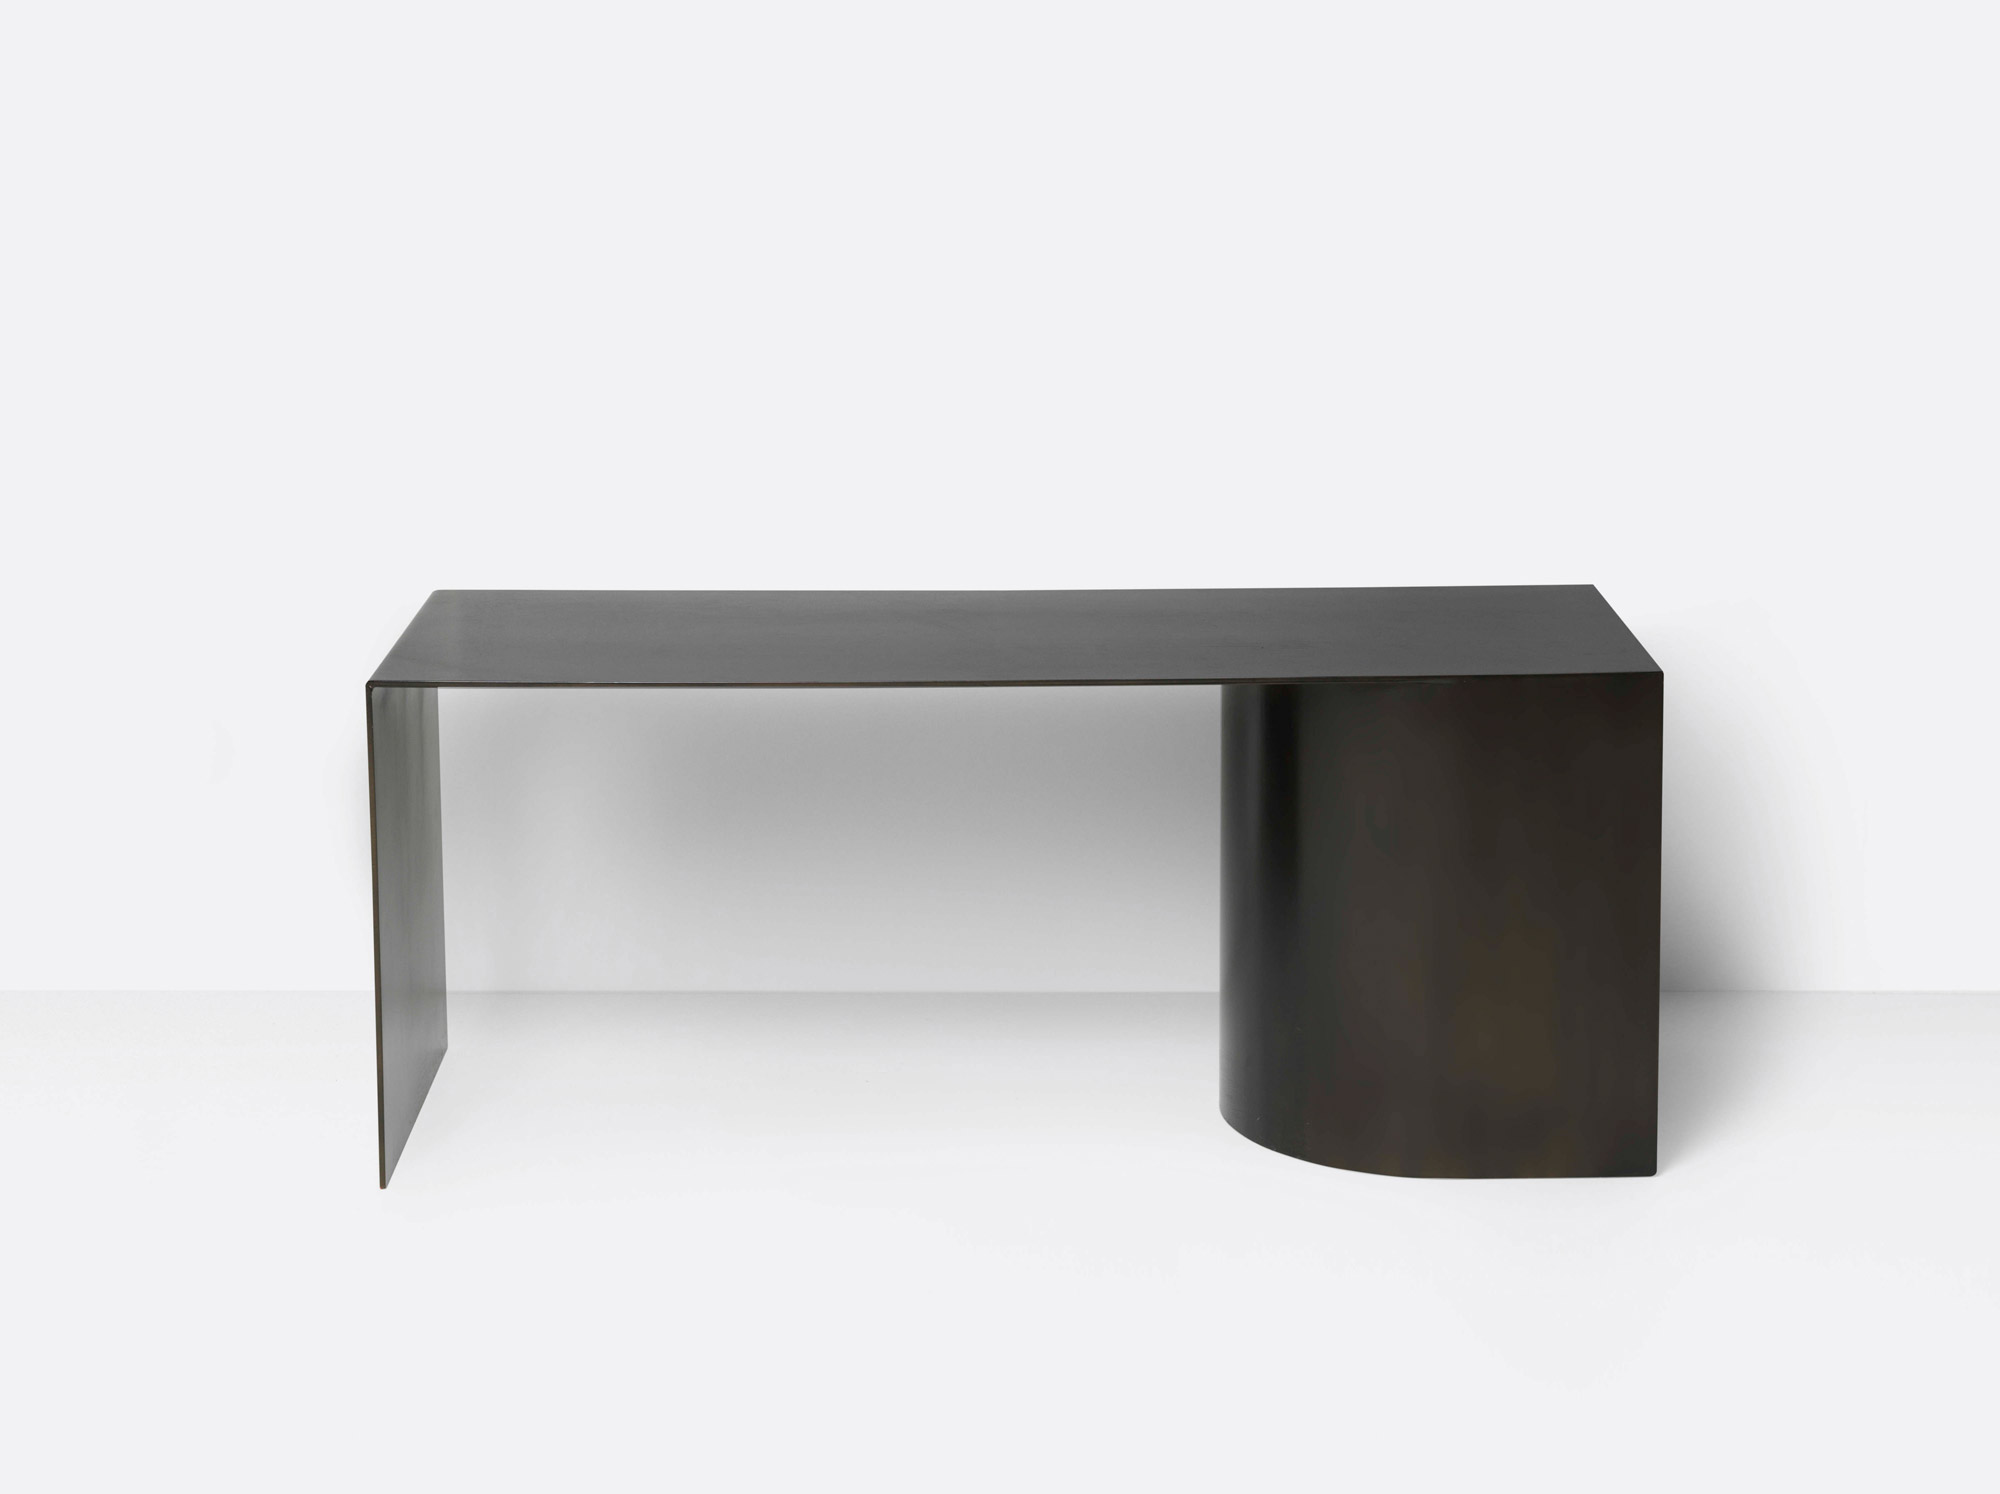 Place Bench by Omayra Maymo | Aesence